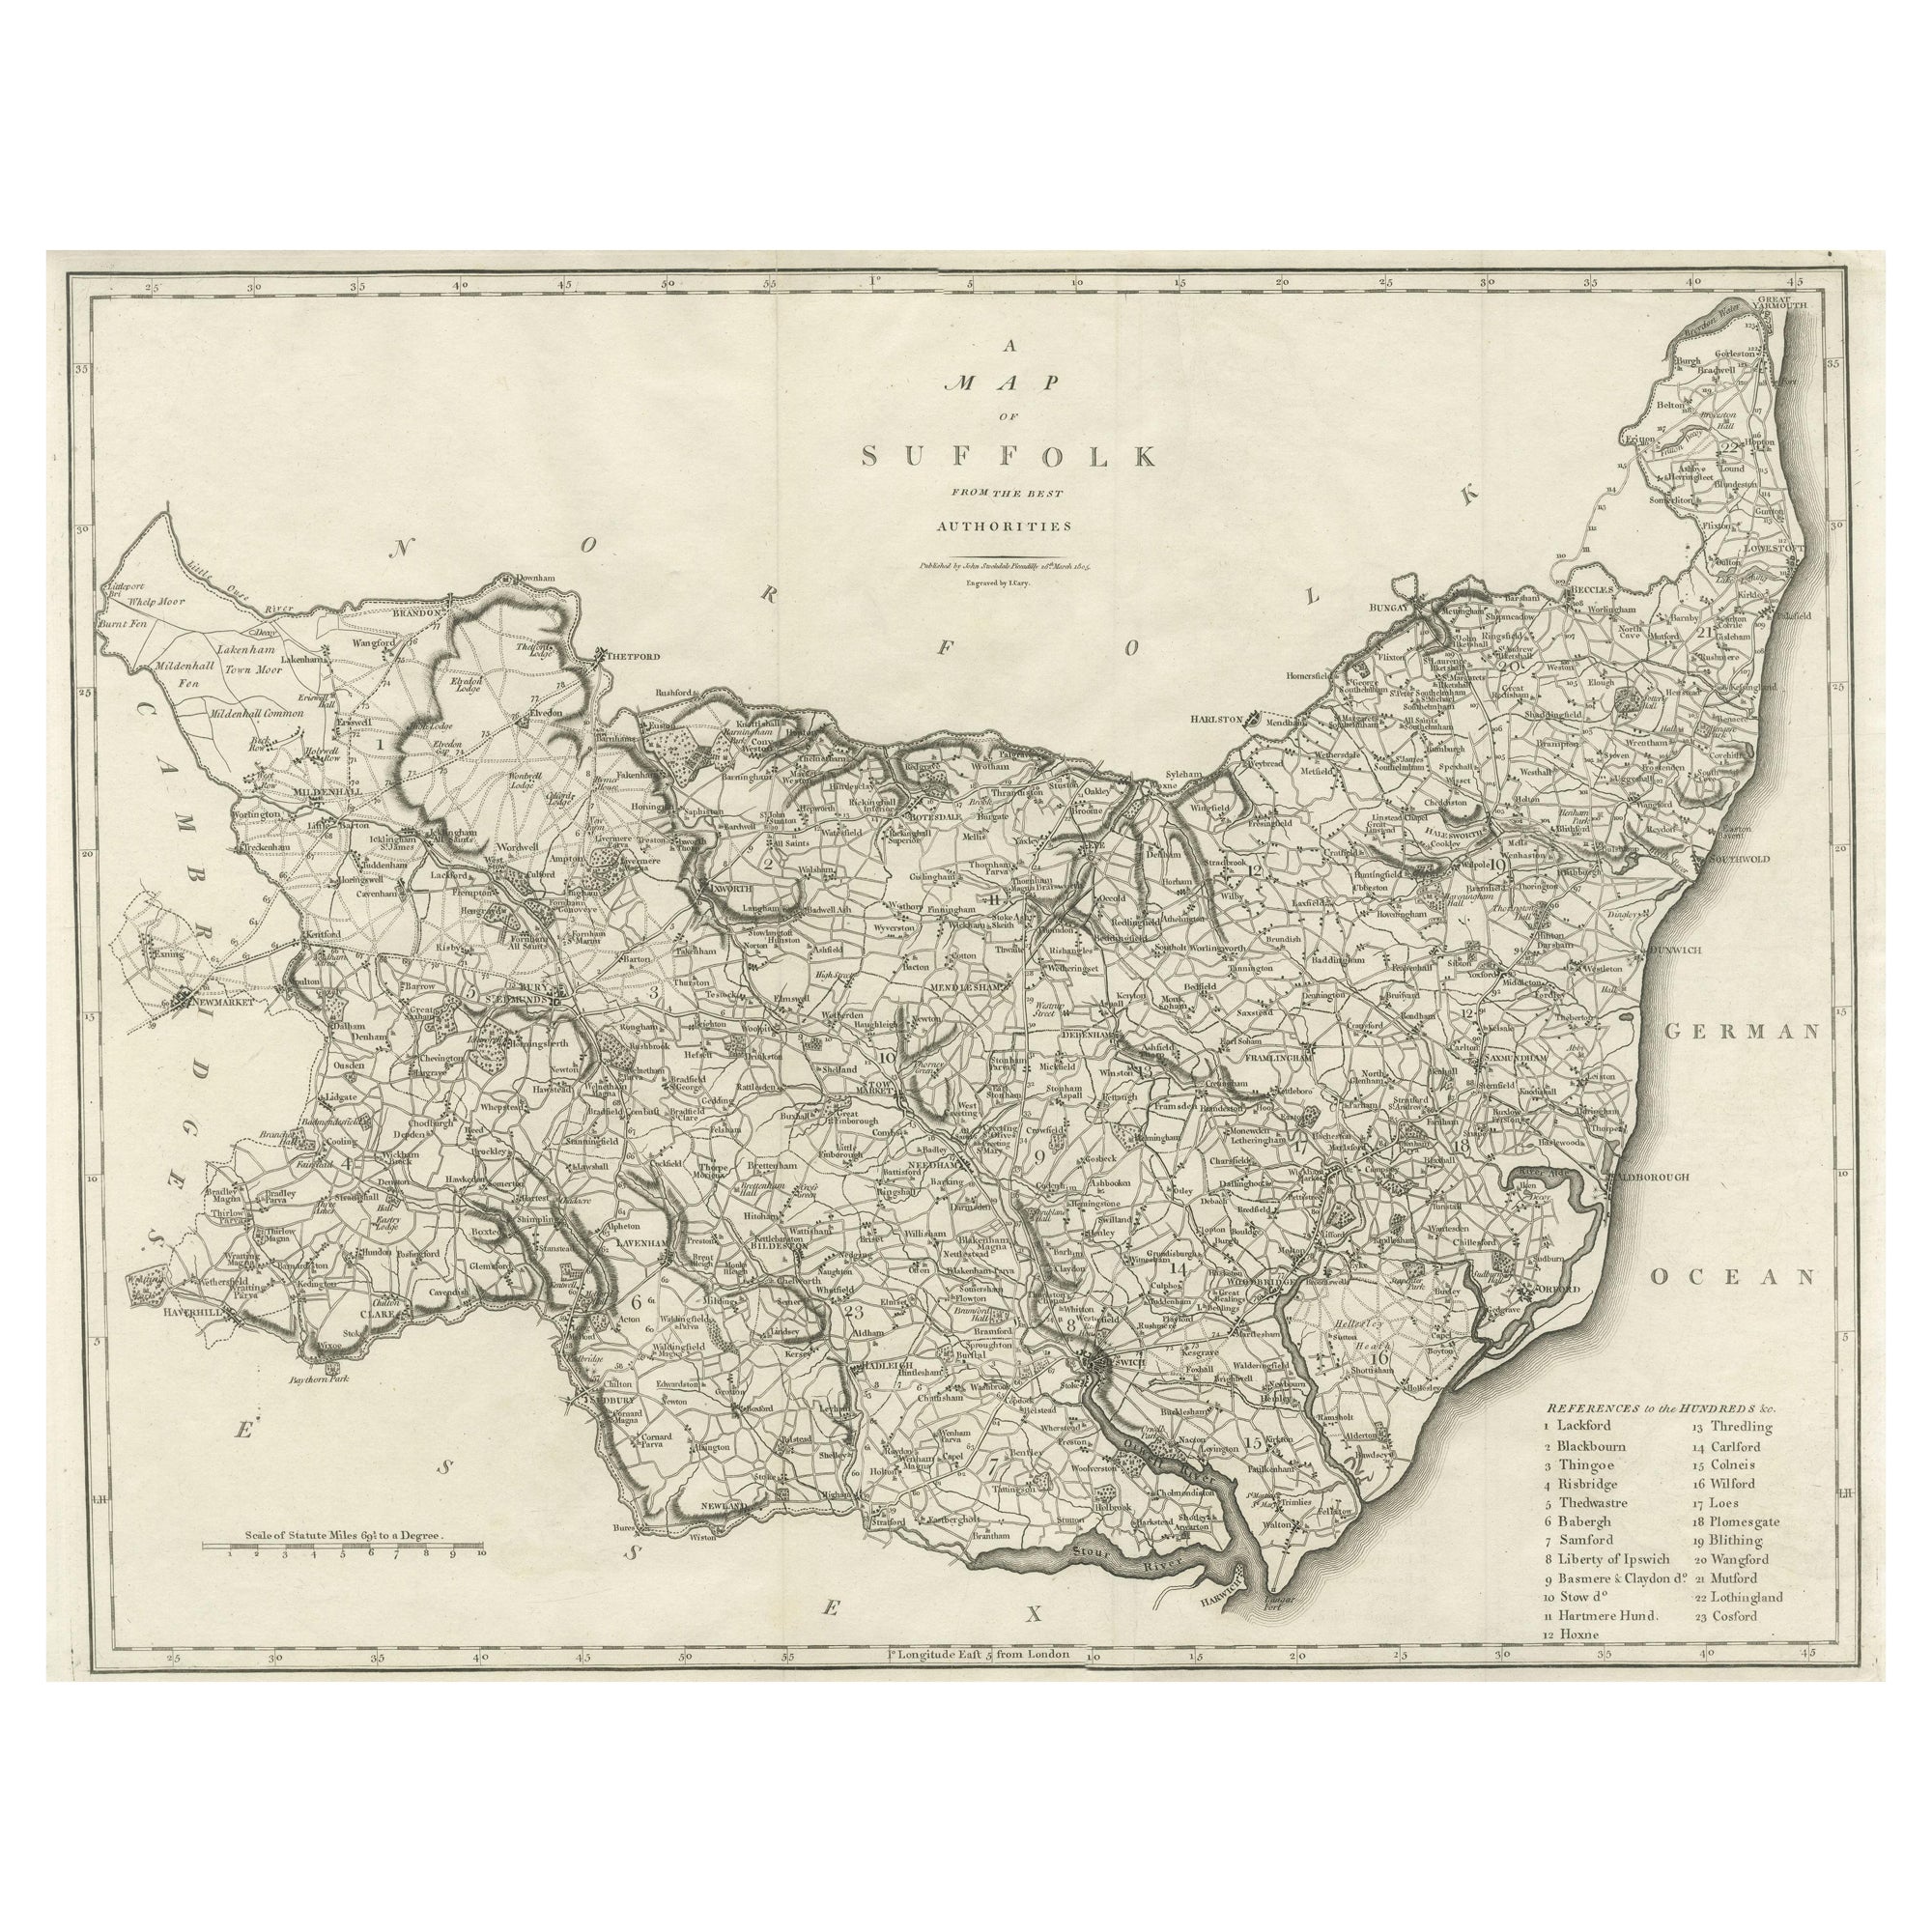 Large Antique County Map of Suffolk, England